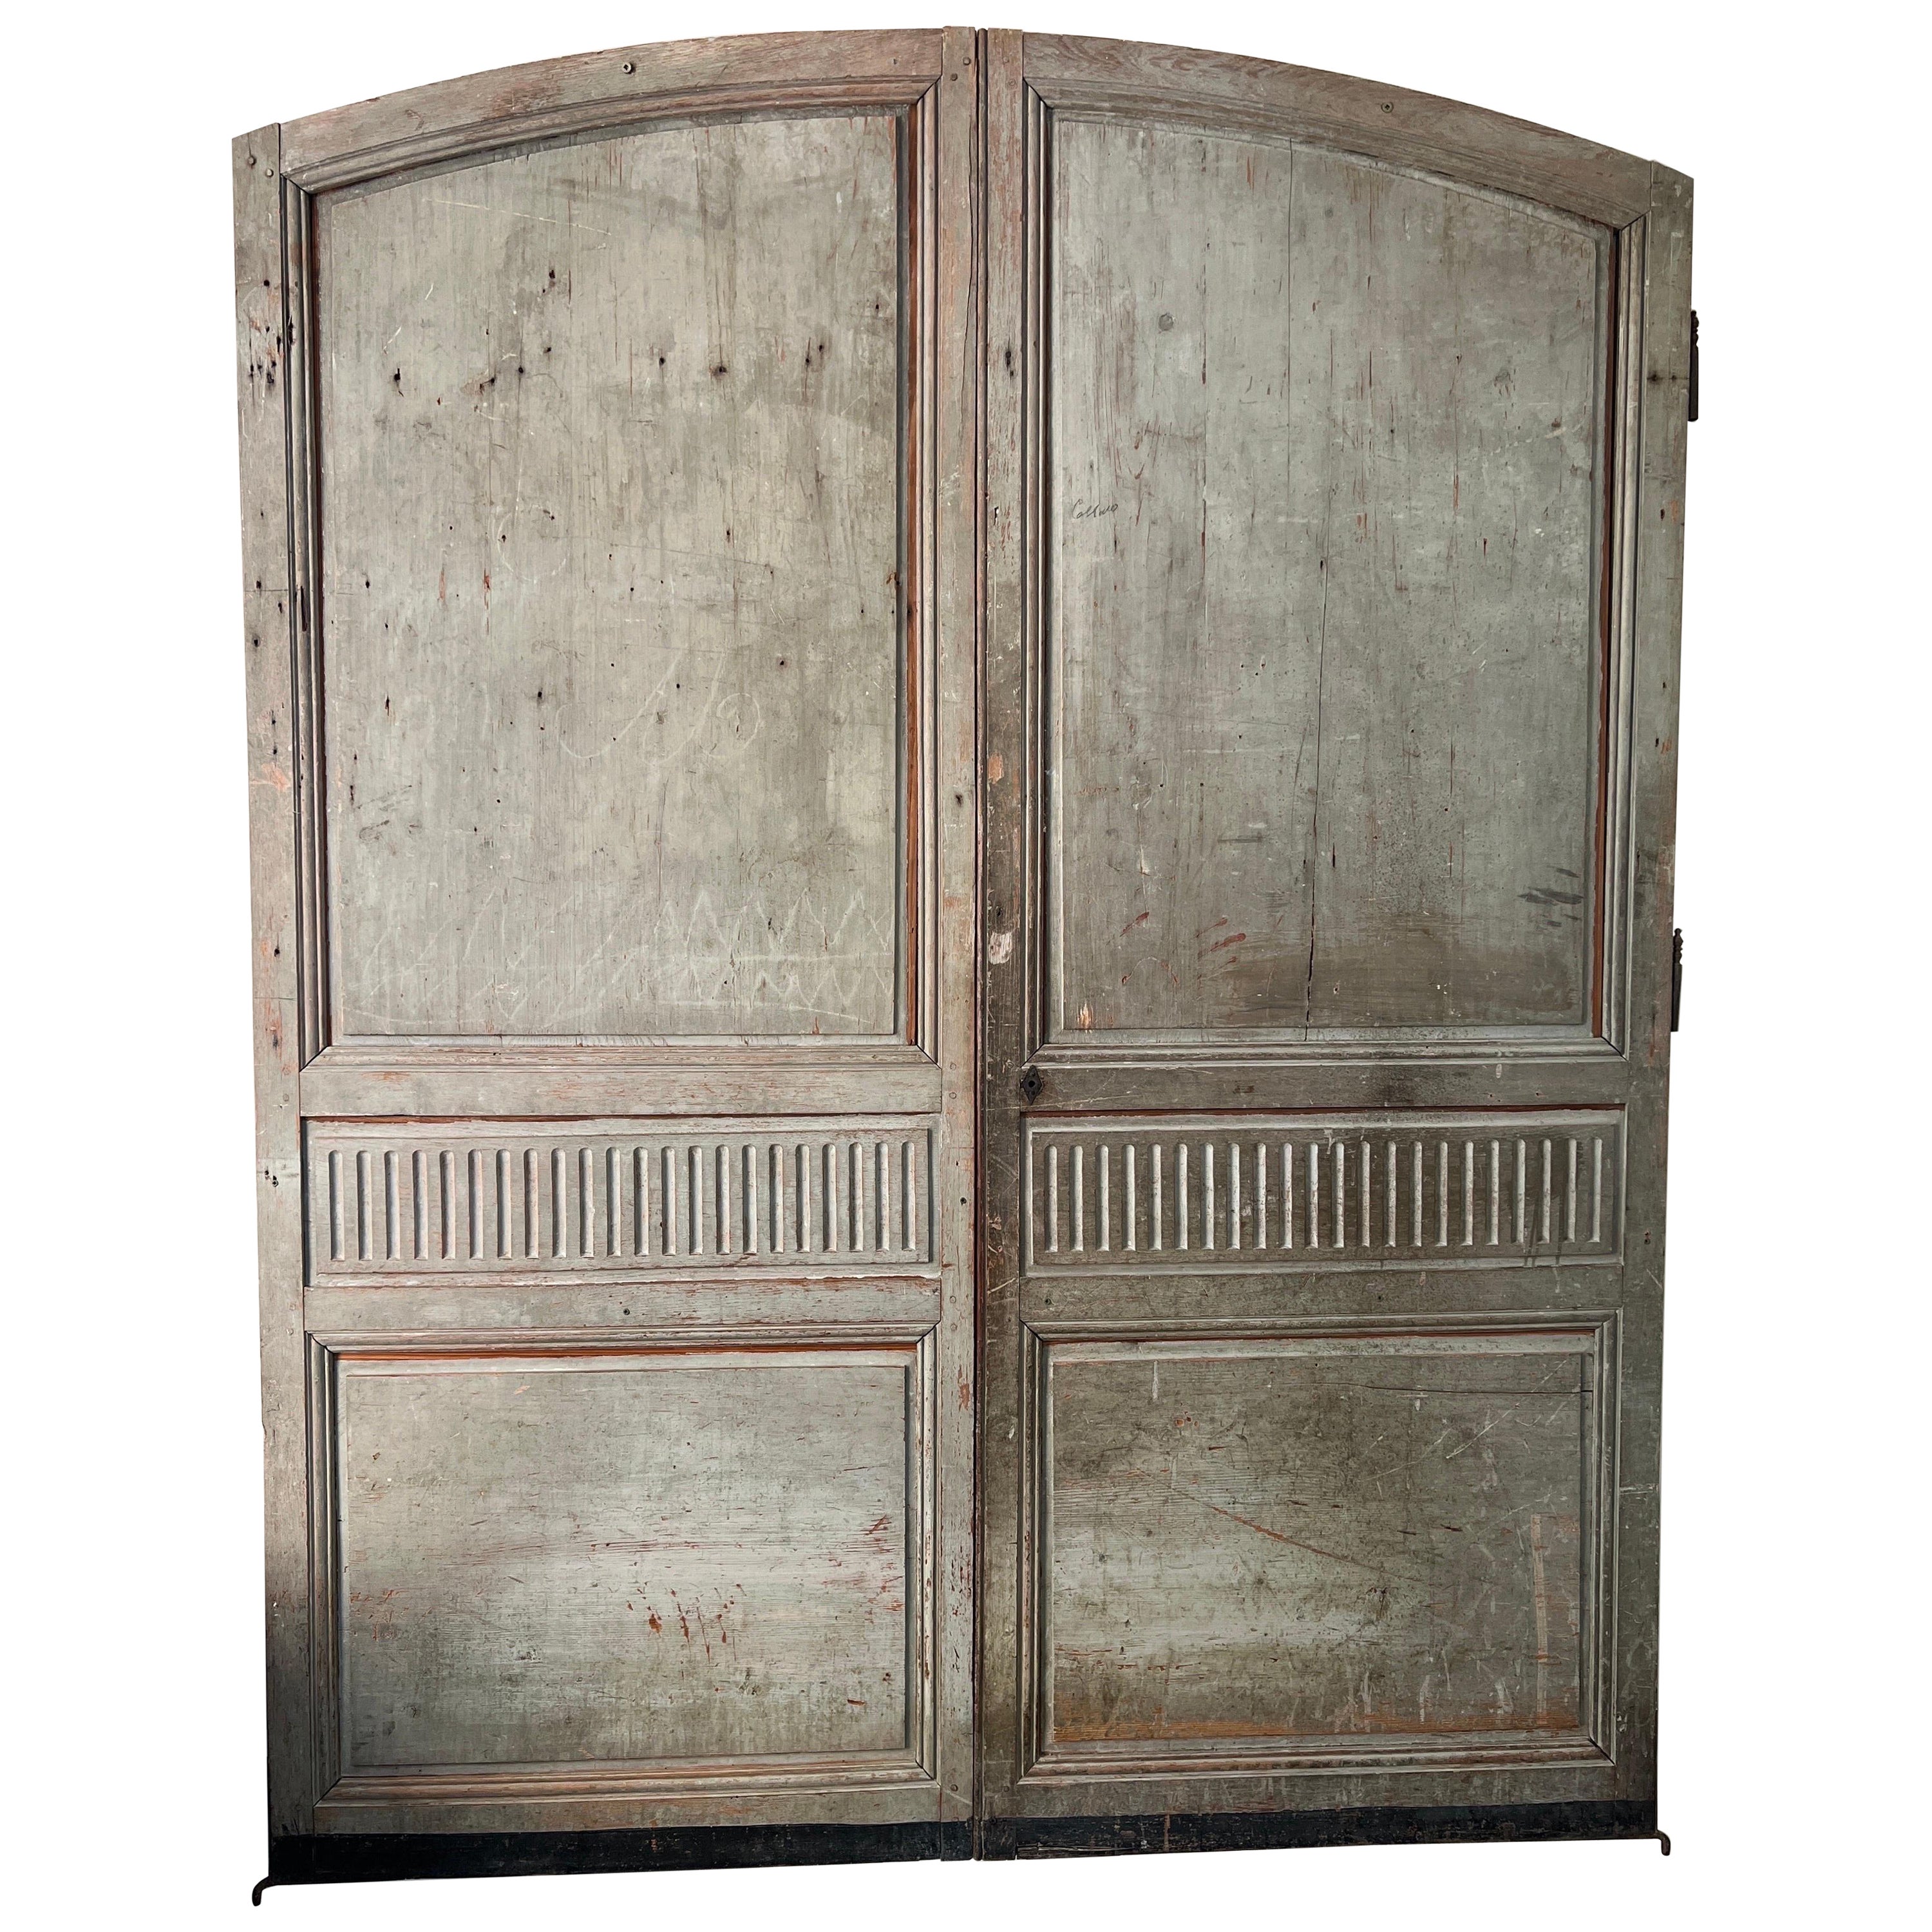 Large 19th Century French Painted Doors For Sale